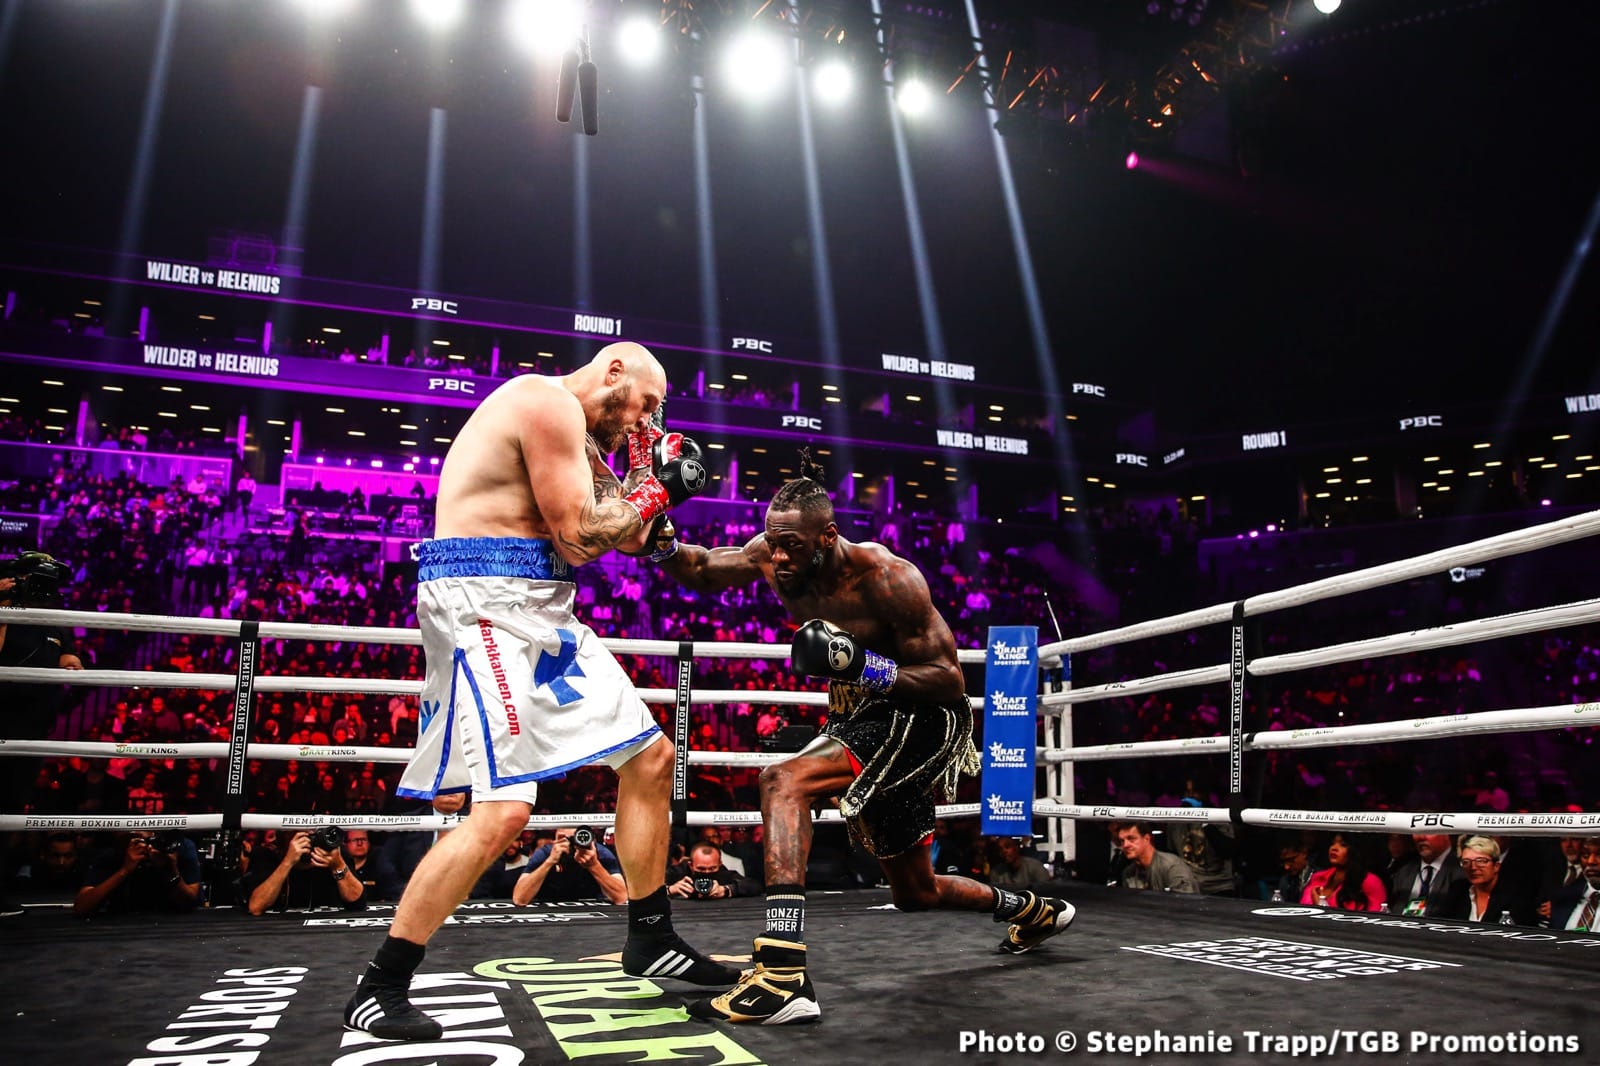 Deontay Wilder obliterates Robert Helenius in 1st round - Boxing Results